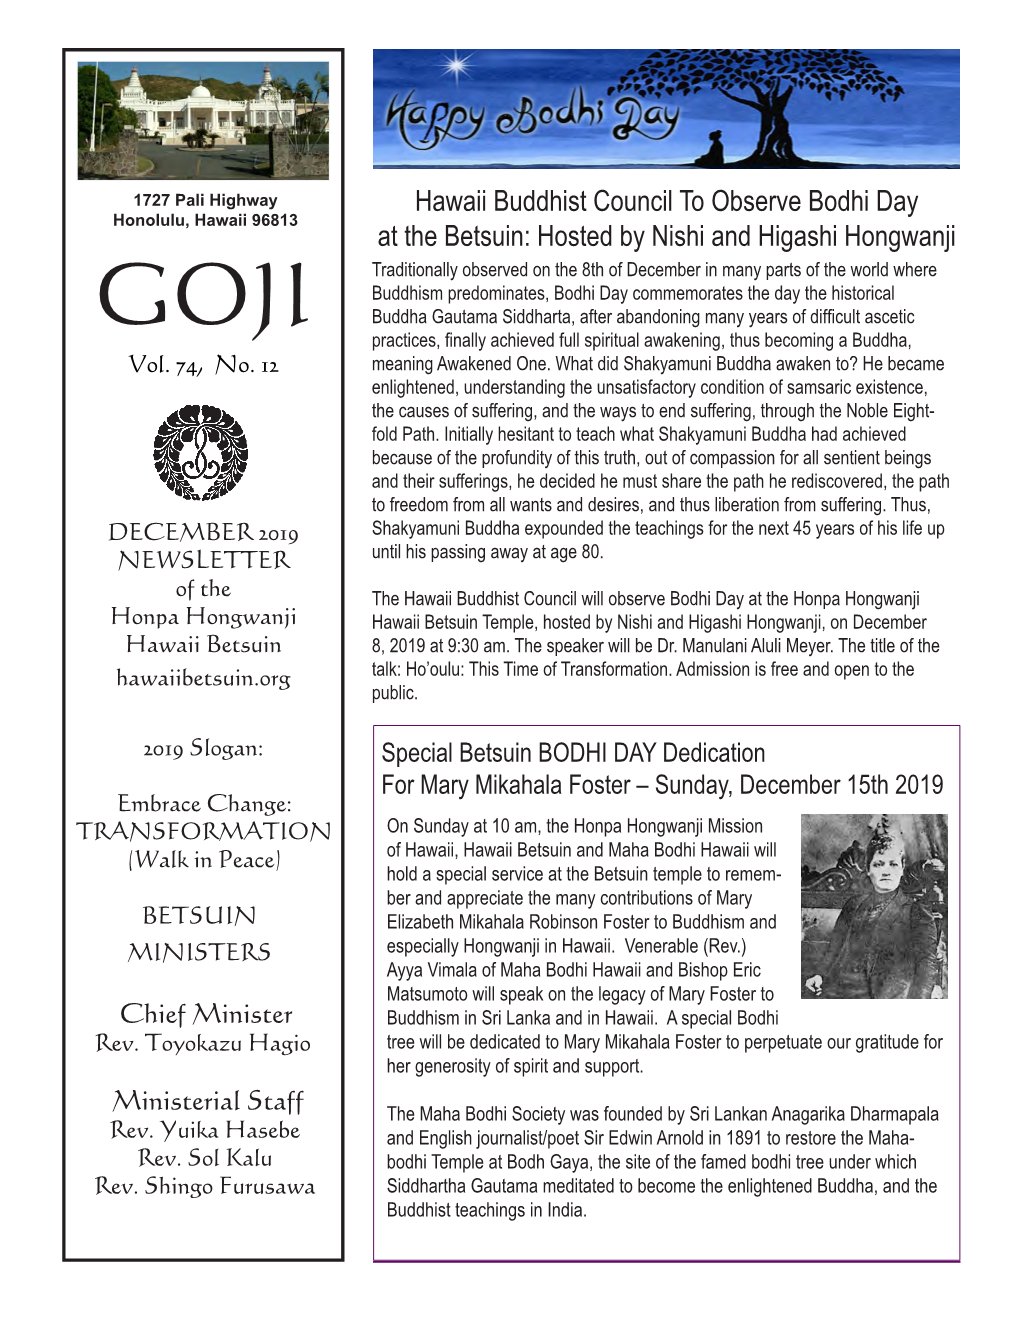 Hawaii Buddhist Council to Observe Bodhi Day at the Betsuin: Hosted By